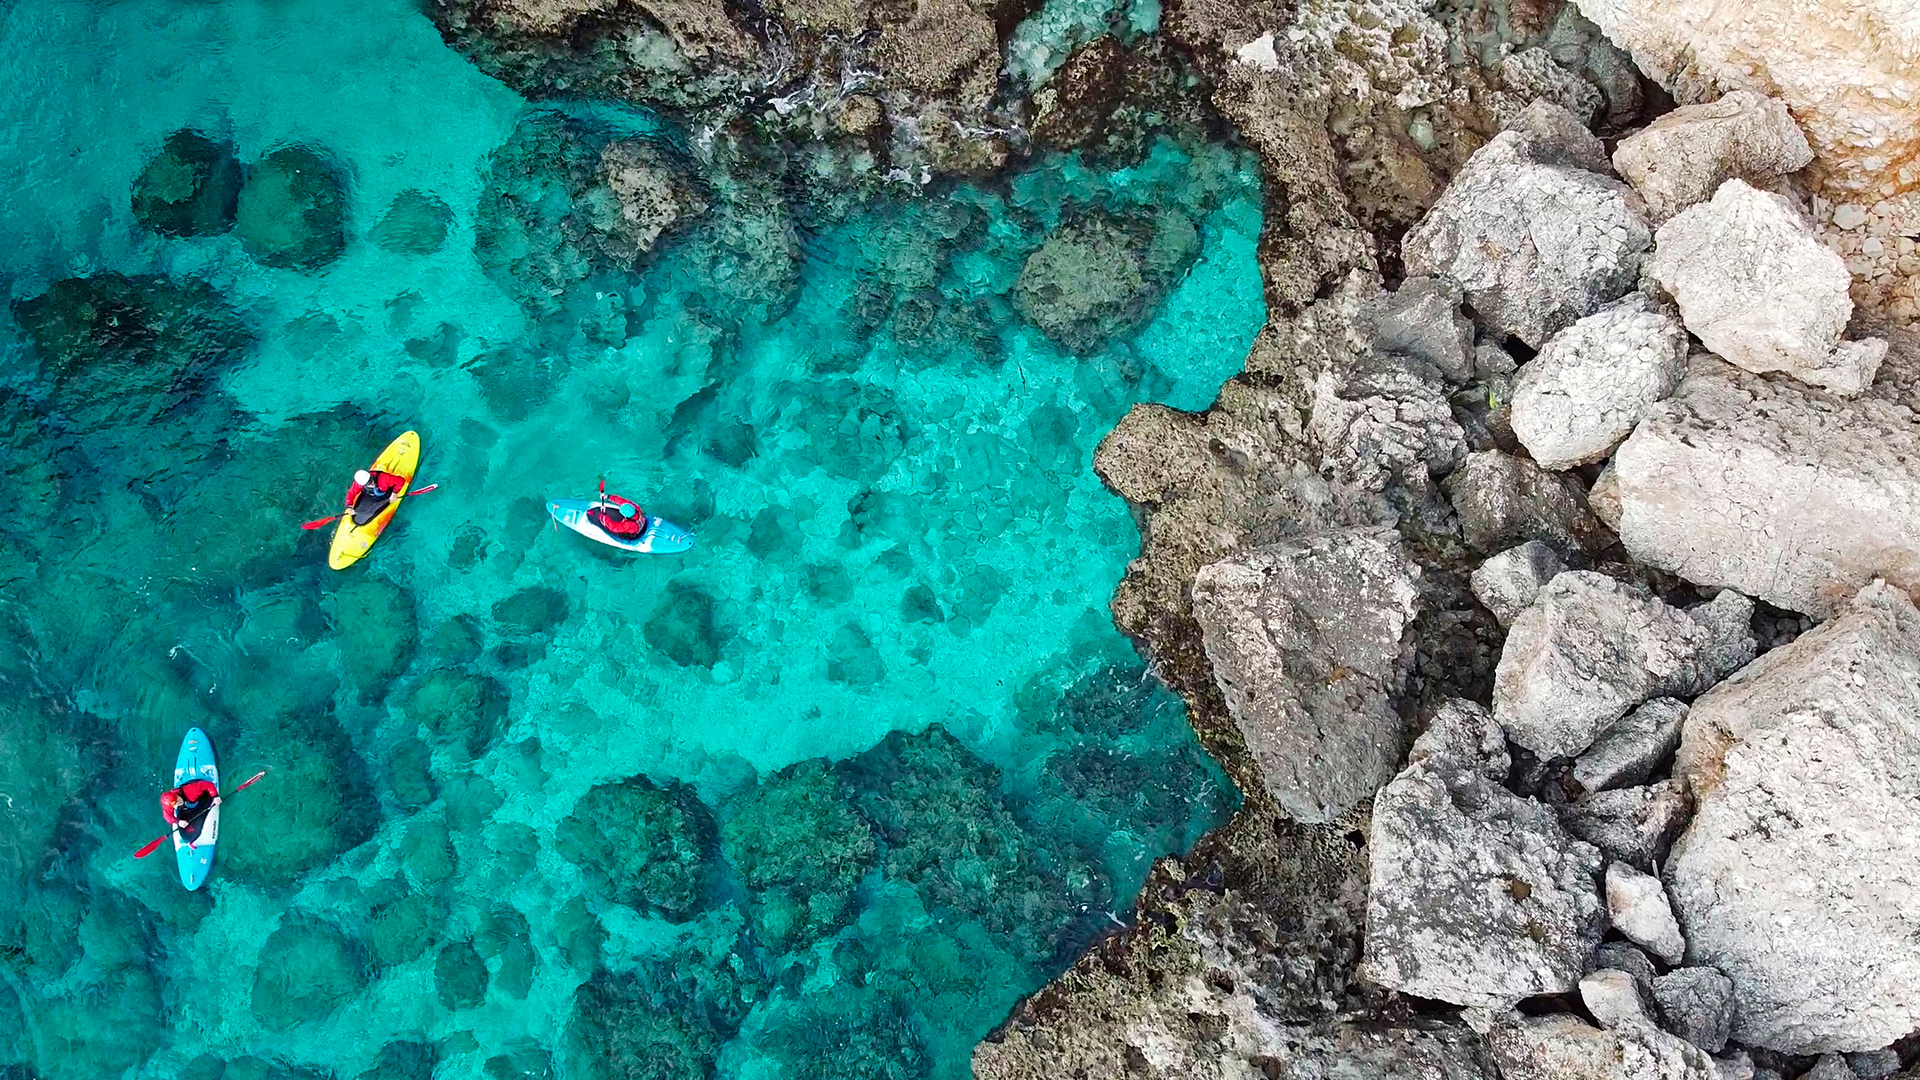 Gliding through crystal-clear waters, kayaking in Cyprus is a tranquil adventure